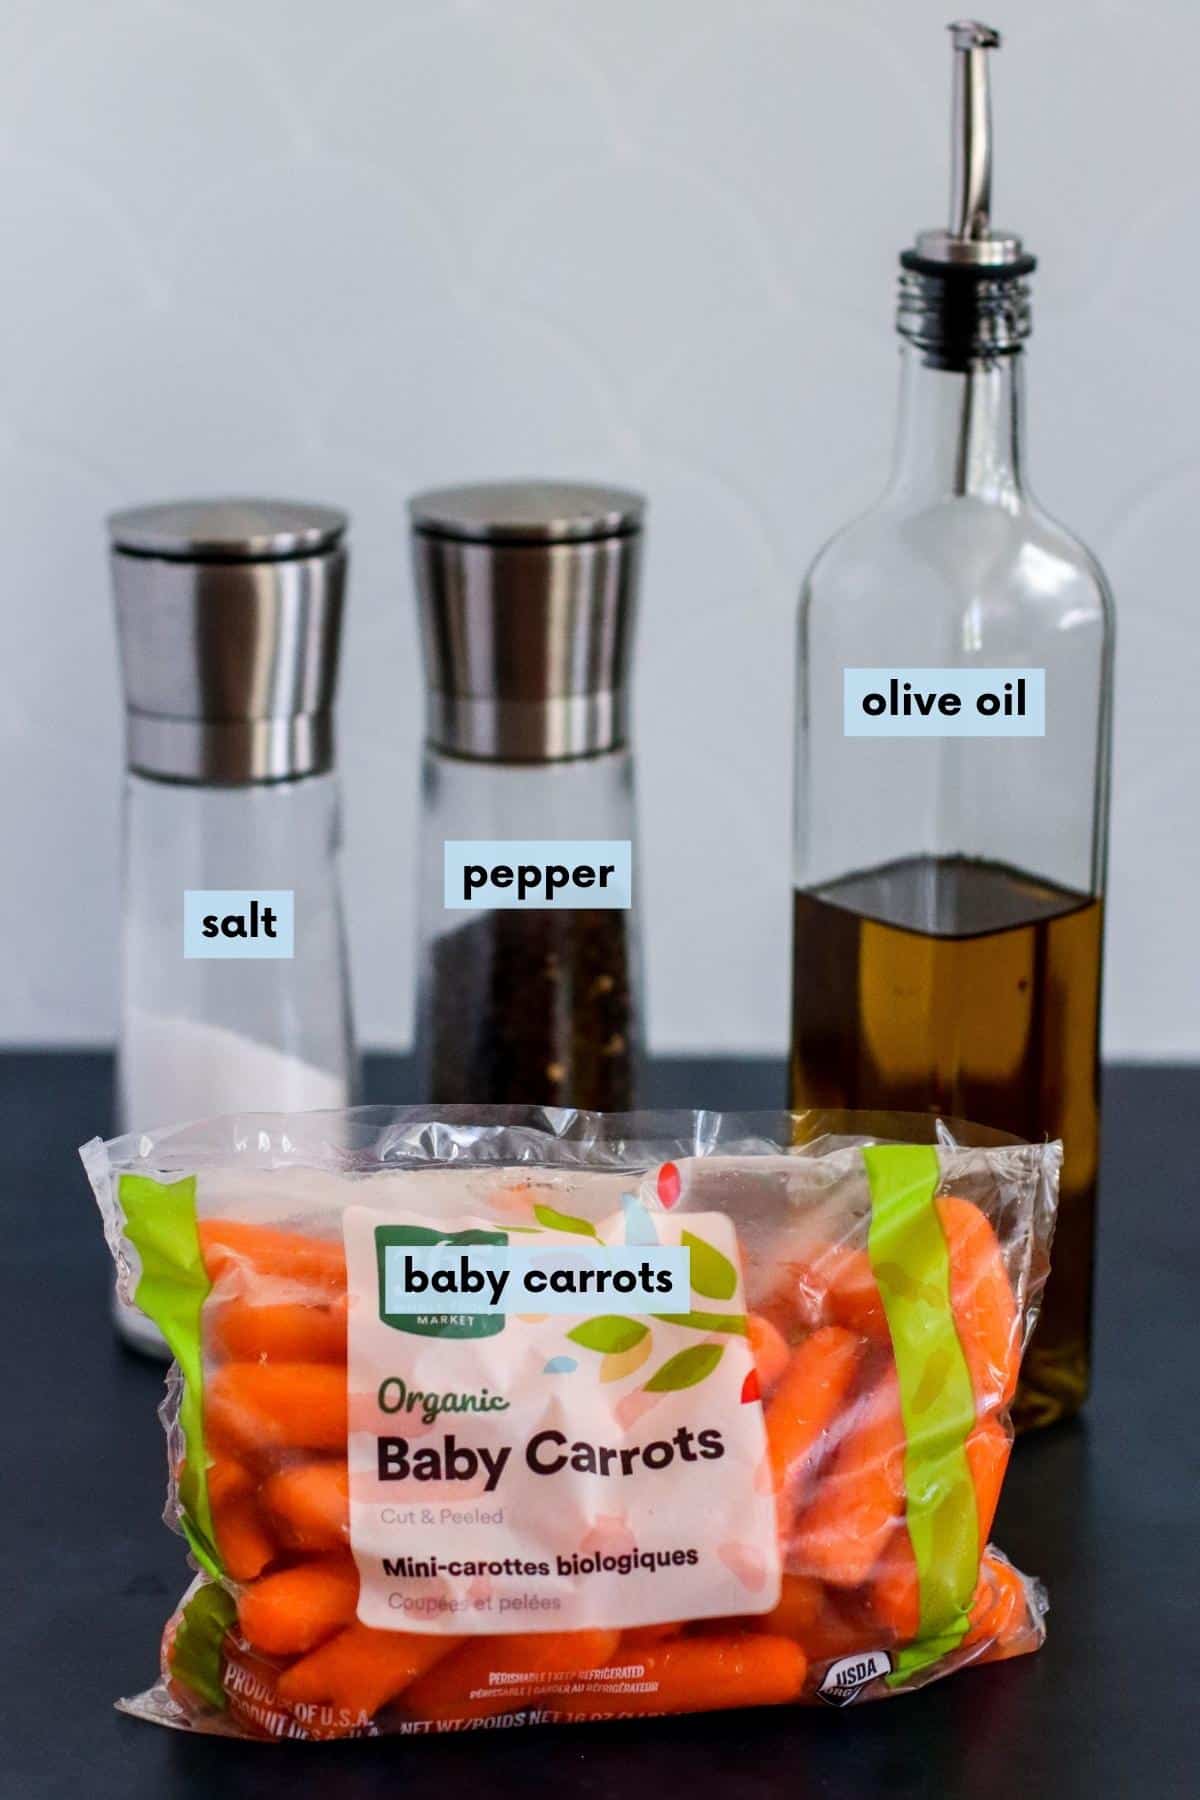 Bag of baby carrots, salt and pepper shakers, and a bottle of olive oil.